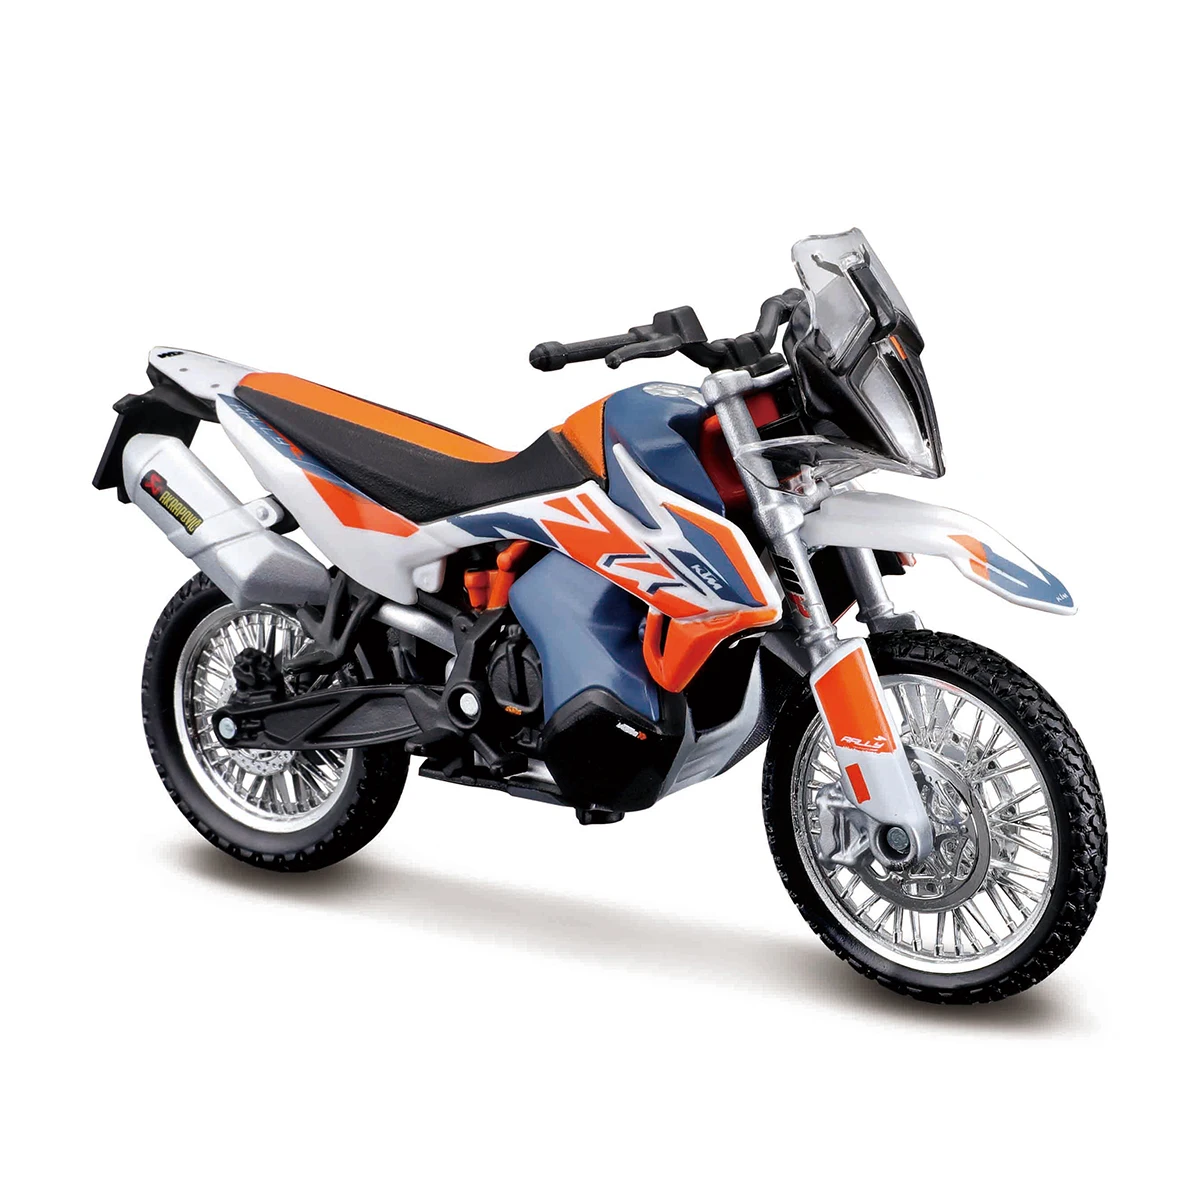 Bburago 1:18 KTM 790 Adventure R Rally Static Die Cast Vehicles Collectible Motorcycle Model Toys